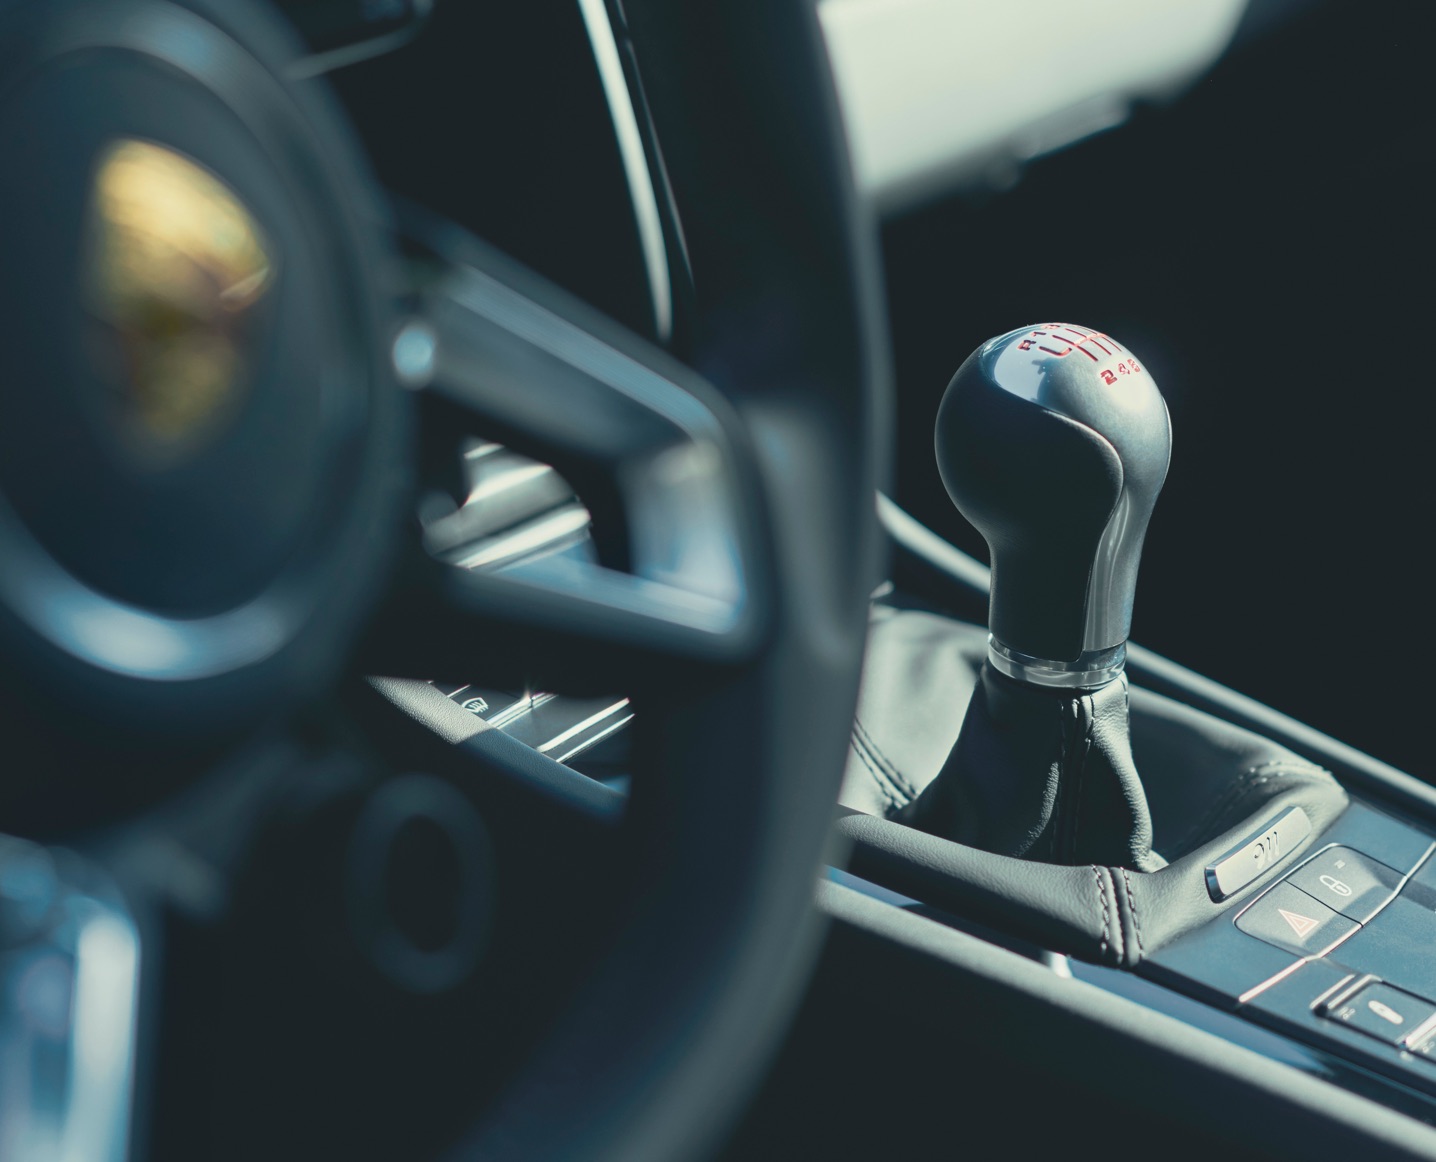 Steering Wheel and stick shift for master the manual